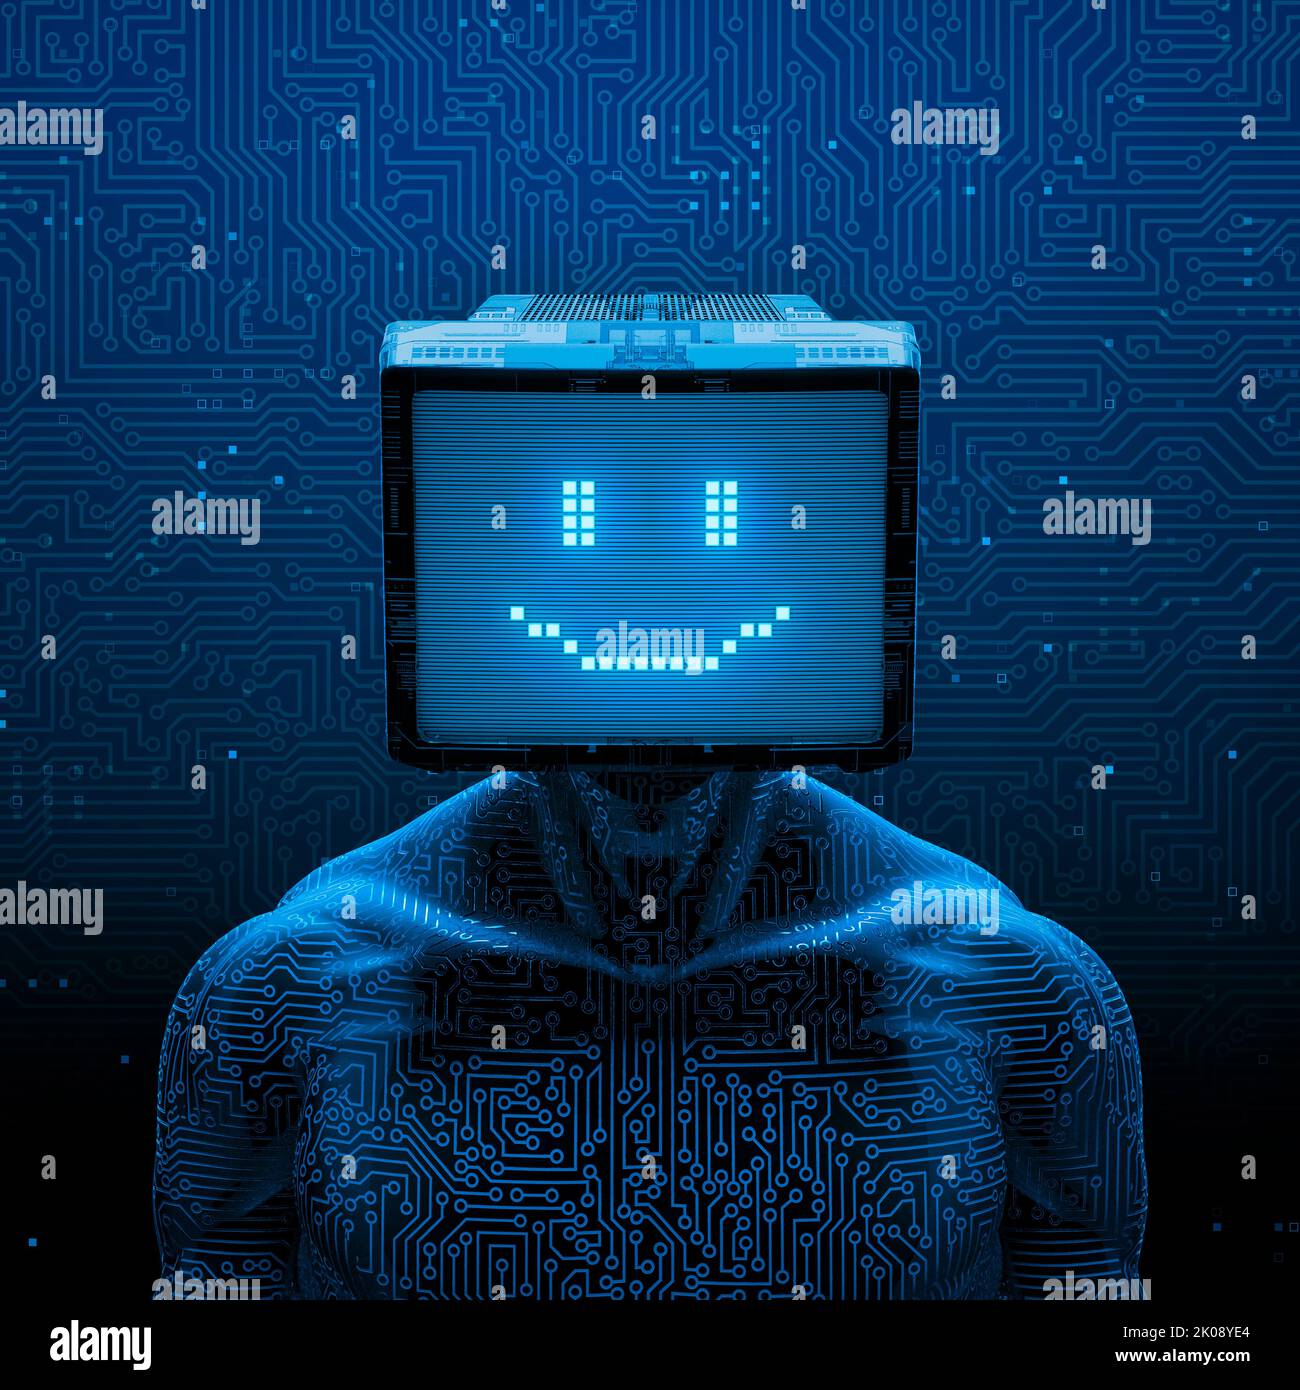 Smiling gamer artificial intelligence - 3D illustration of dark pixel smile faced male robot figure with computer monitor head on circuit background Stock Photo